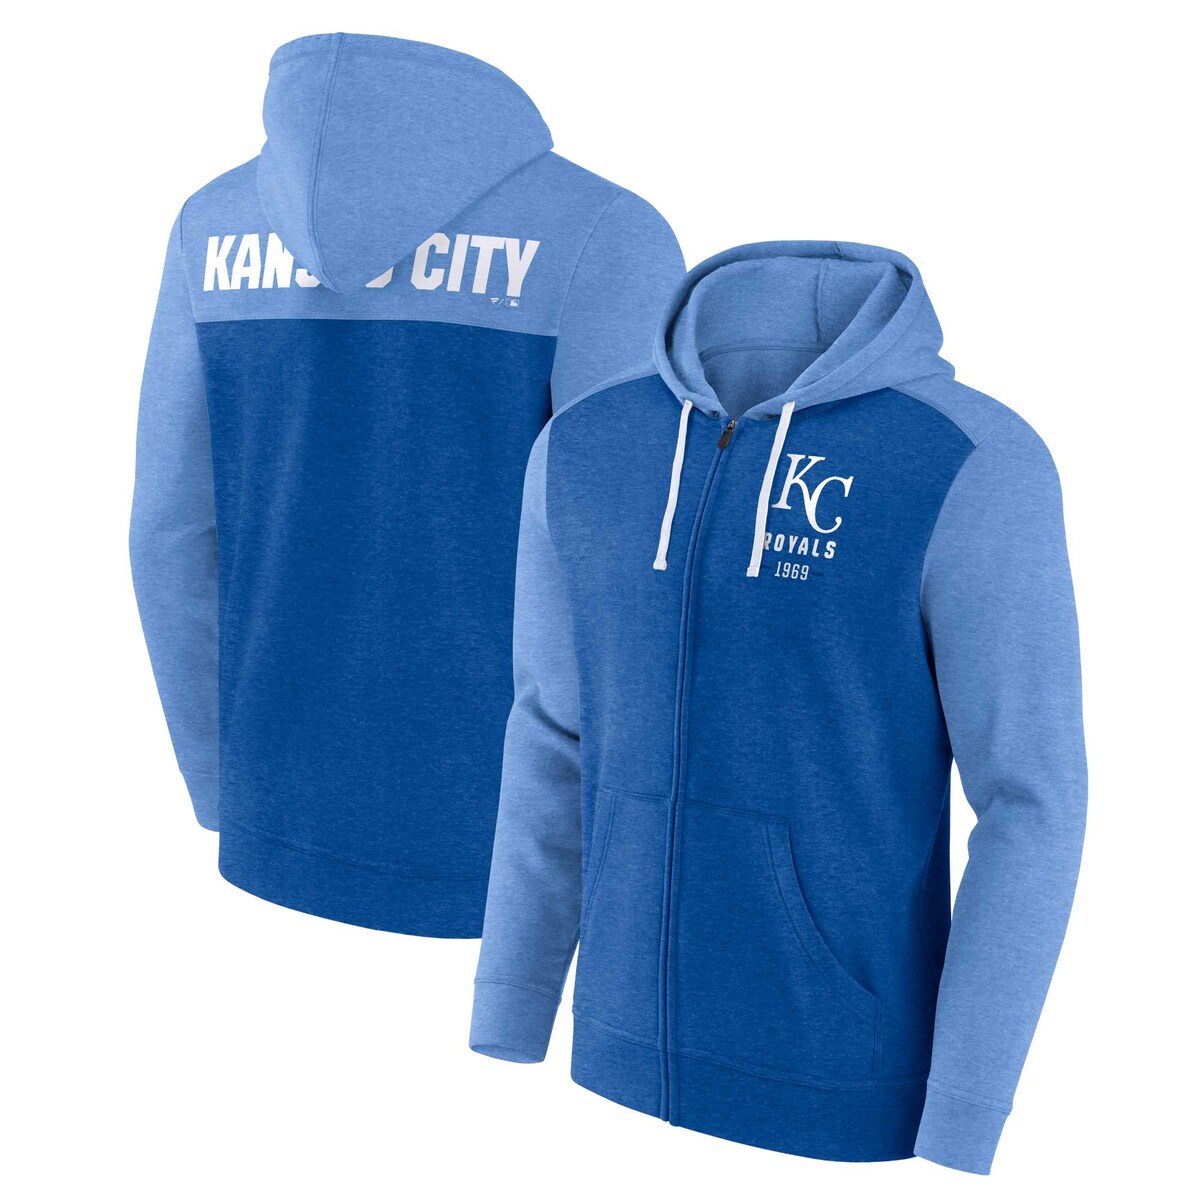 Layer up in bold Kansas City Royals fashion by sporting this Blown Away full-zip hoodie. This extra layer from Fanatics Branded features an instantly recognizable colorway and a cozy midweight design that makes it an ideal choice for cooler temperatures. With Kansas City Royals graphics on display in the front and back, nobody will doubt where your loyalty lies.Officially licensedFull ZipHoodedFull-zipTwo front pocketsMachine wash, tumble dry lowBrand: Fanatics BrandedHood with drawstringMaterial: 60% Cotton/40% PolyesterScreen print graphicsImportedLong sleeveLightweight hoodie suitable for moderate temperatures